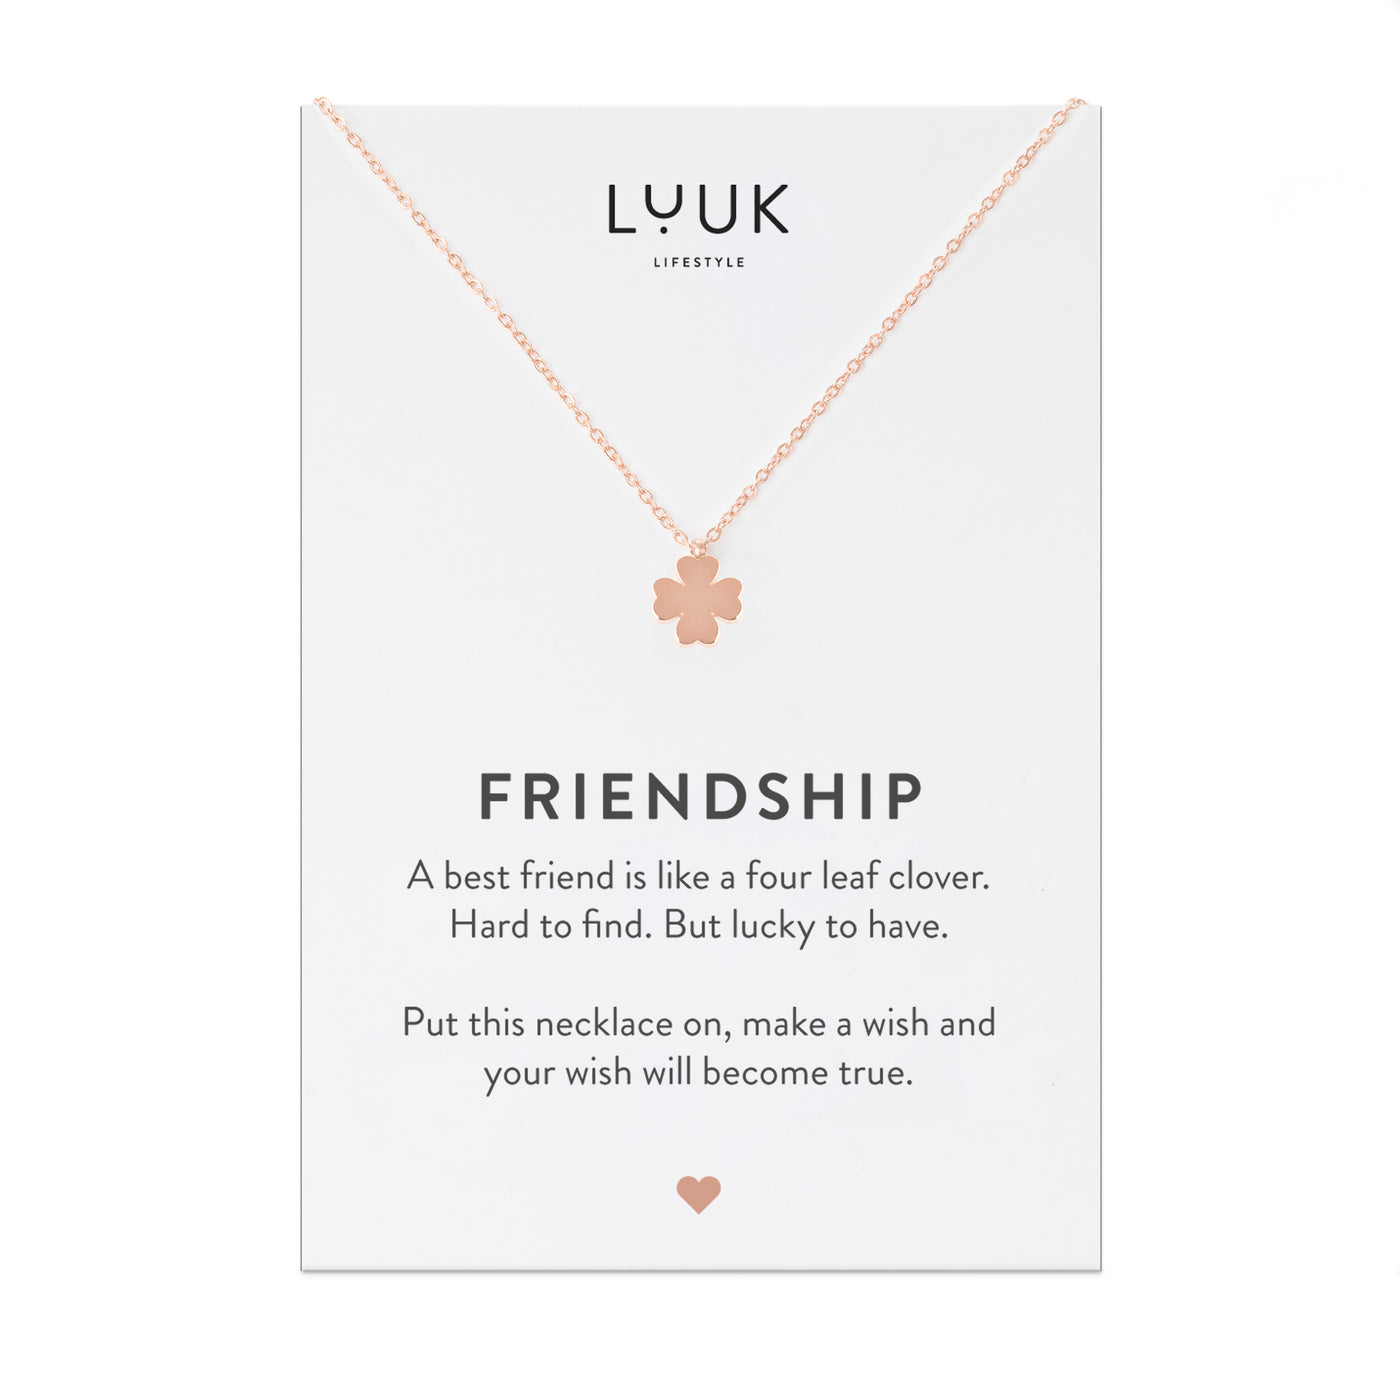 Necklace with clover leaf pendant and Friendship greeting card